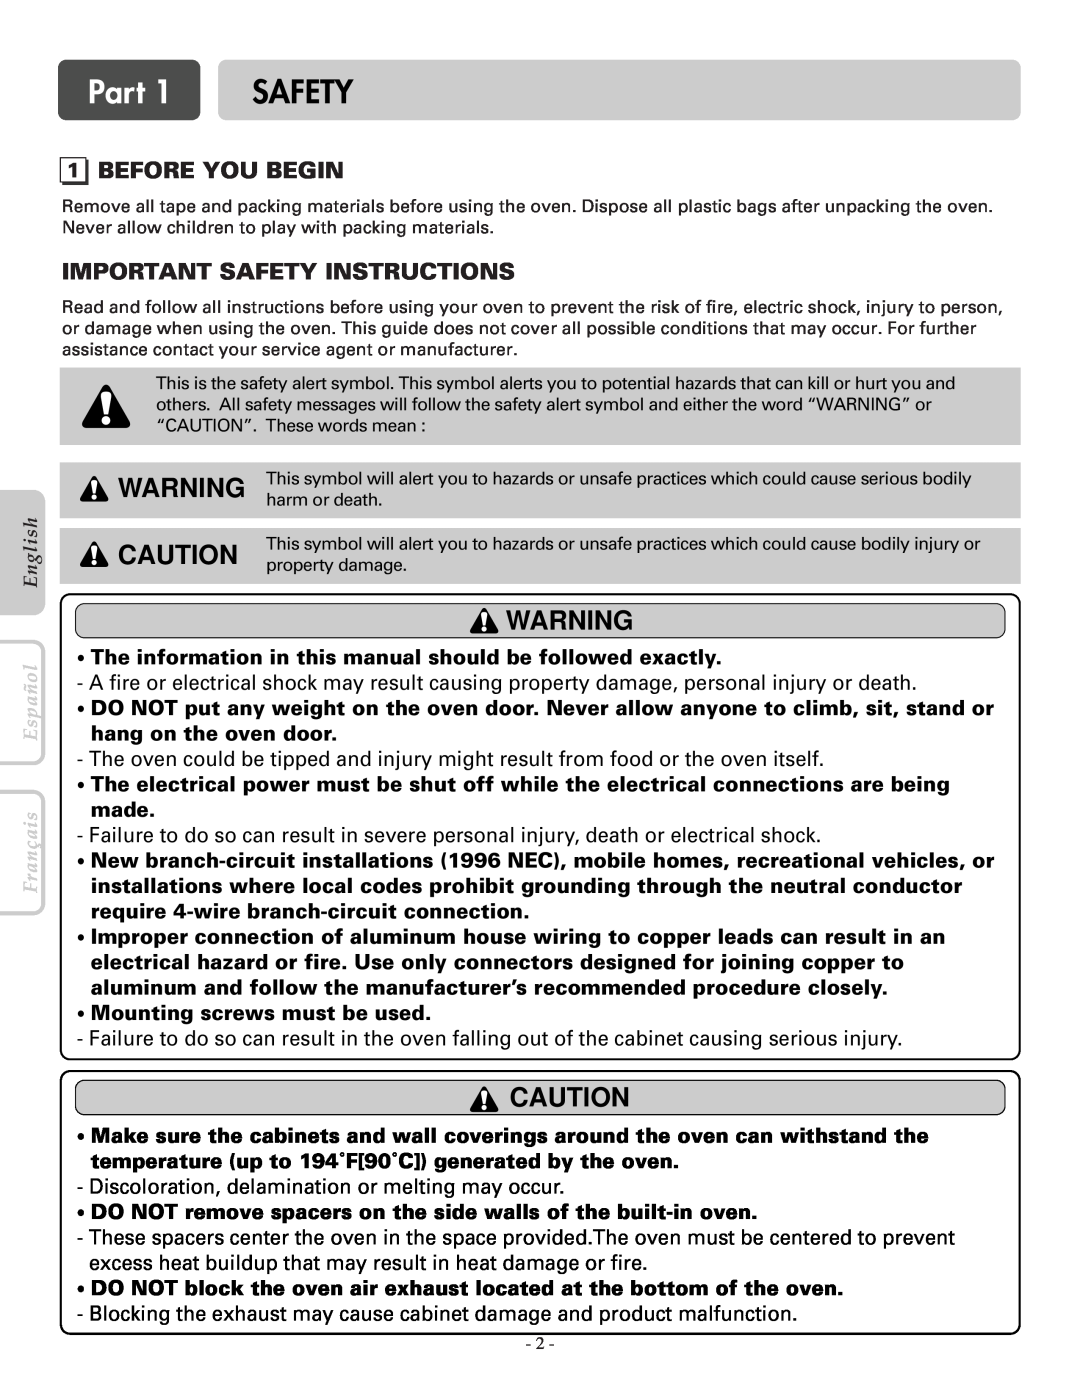 LG Electronics LWS3081ST, LWD3081ST Part, Before You Begin, Important Safety Instructions, hang on the oven door 